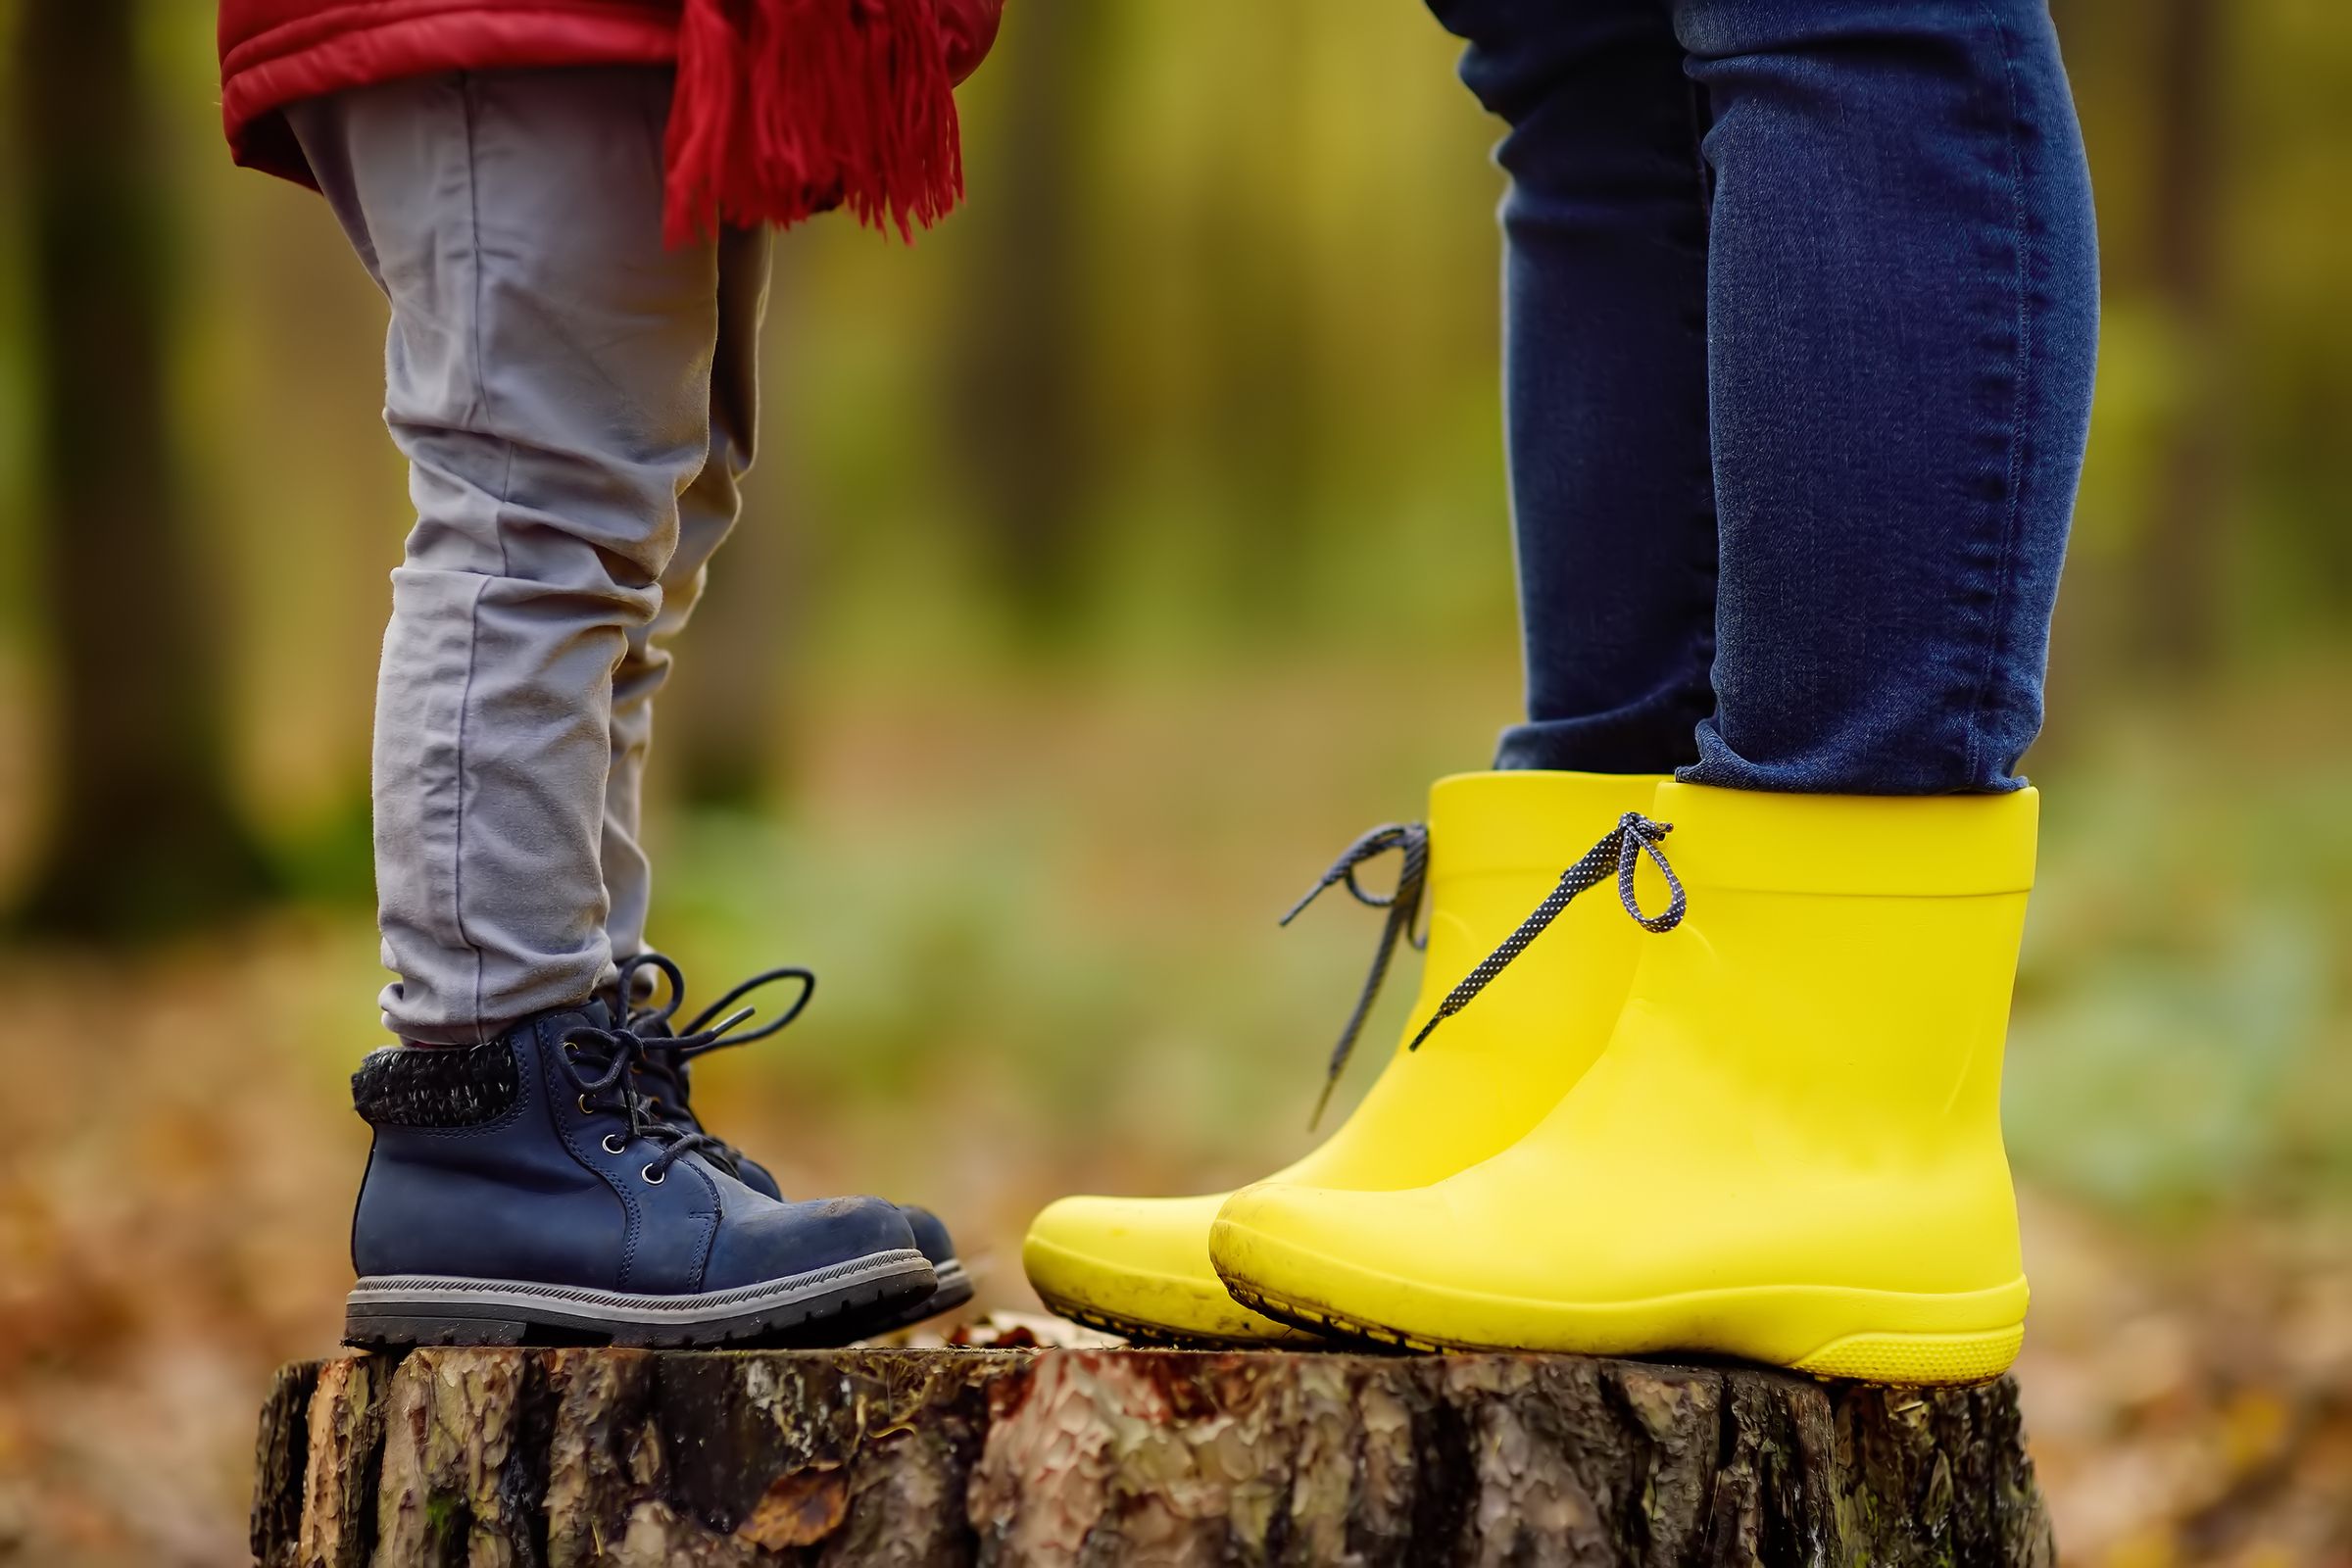 child and adult in boots standing on tree stump